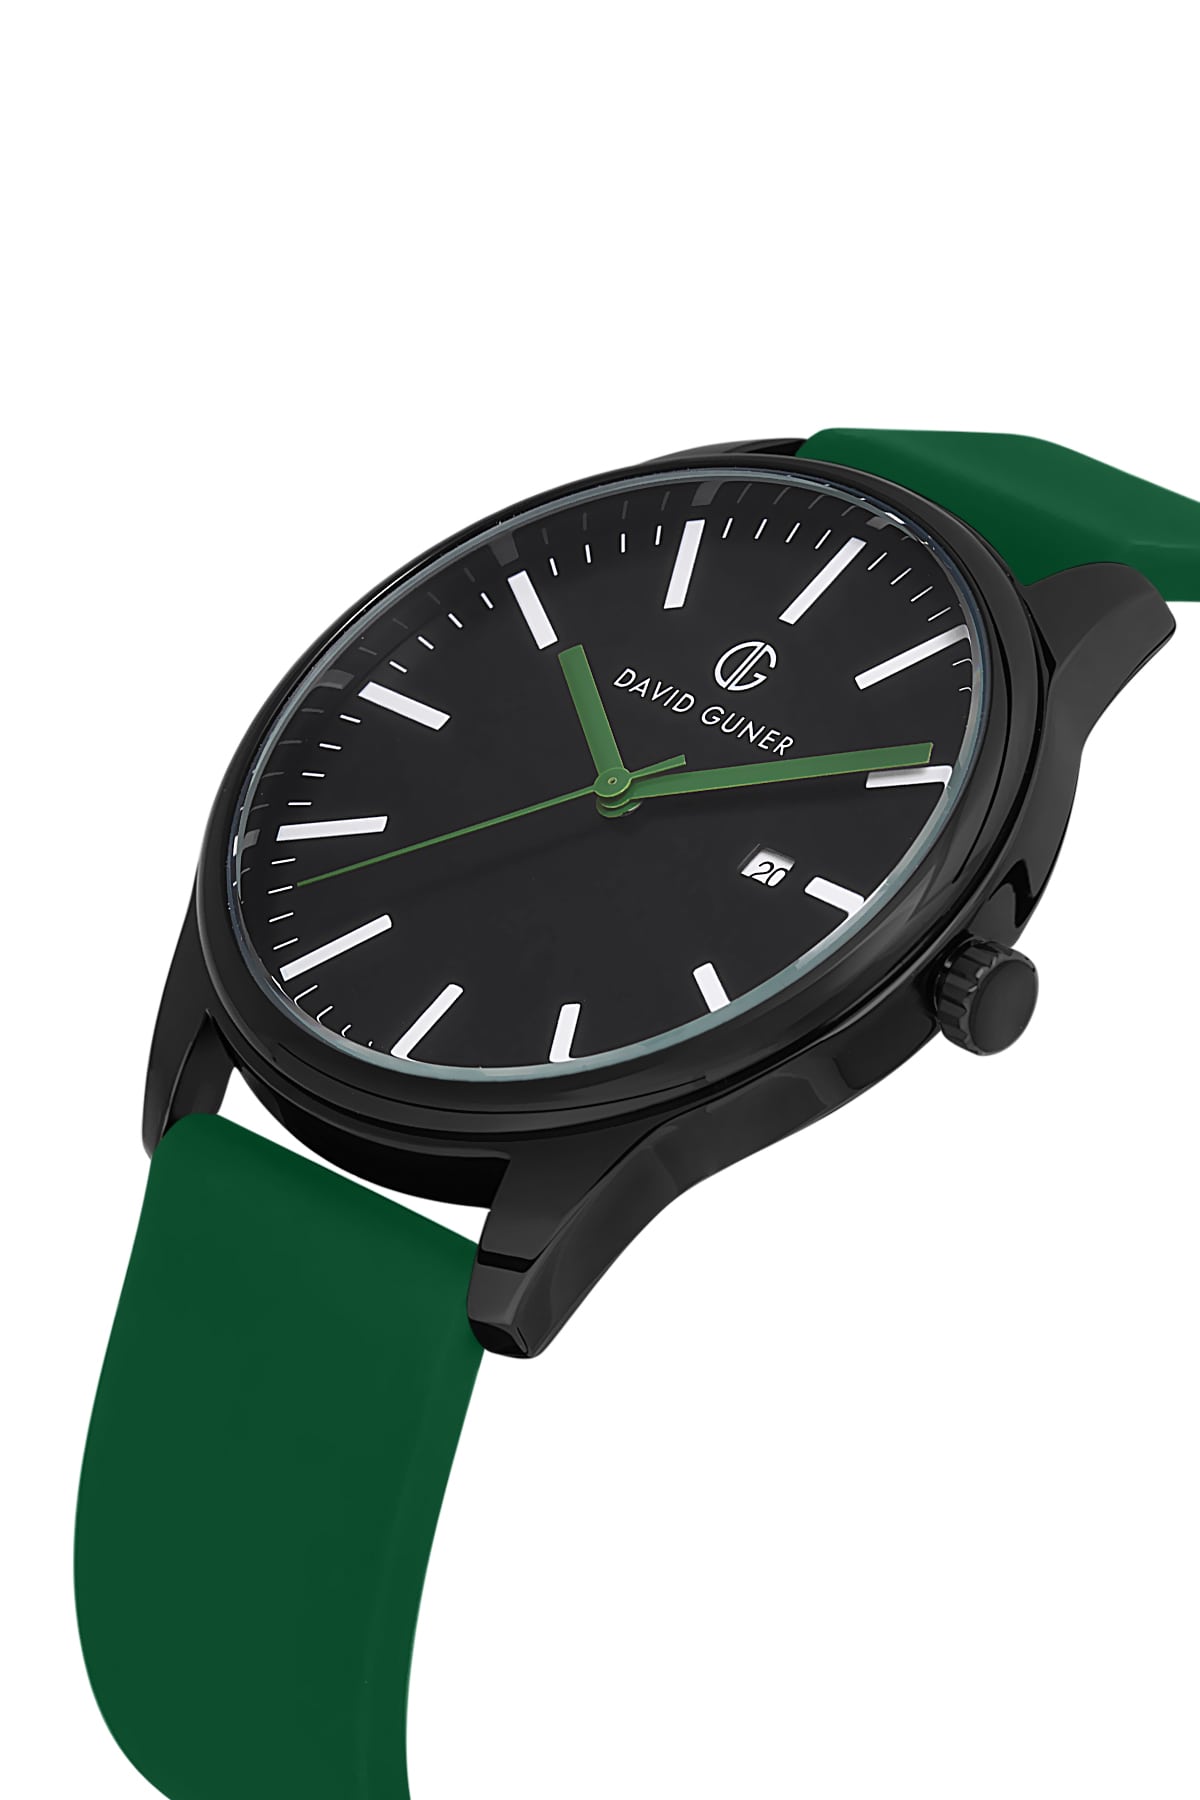 DAVID GUNER Men's Wristwatch with Black Dial and Green Silicone Strap with Calendar